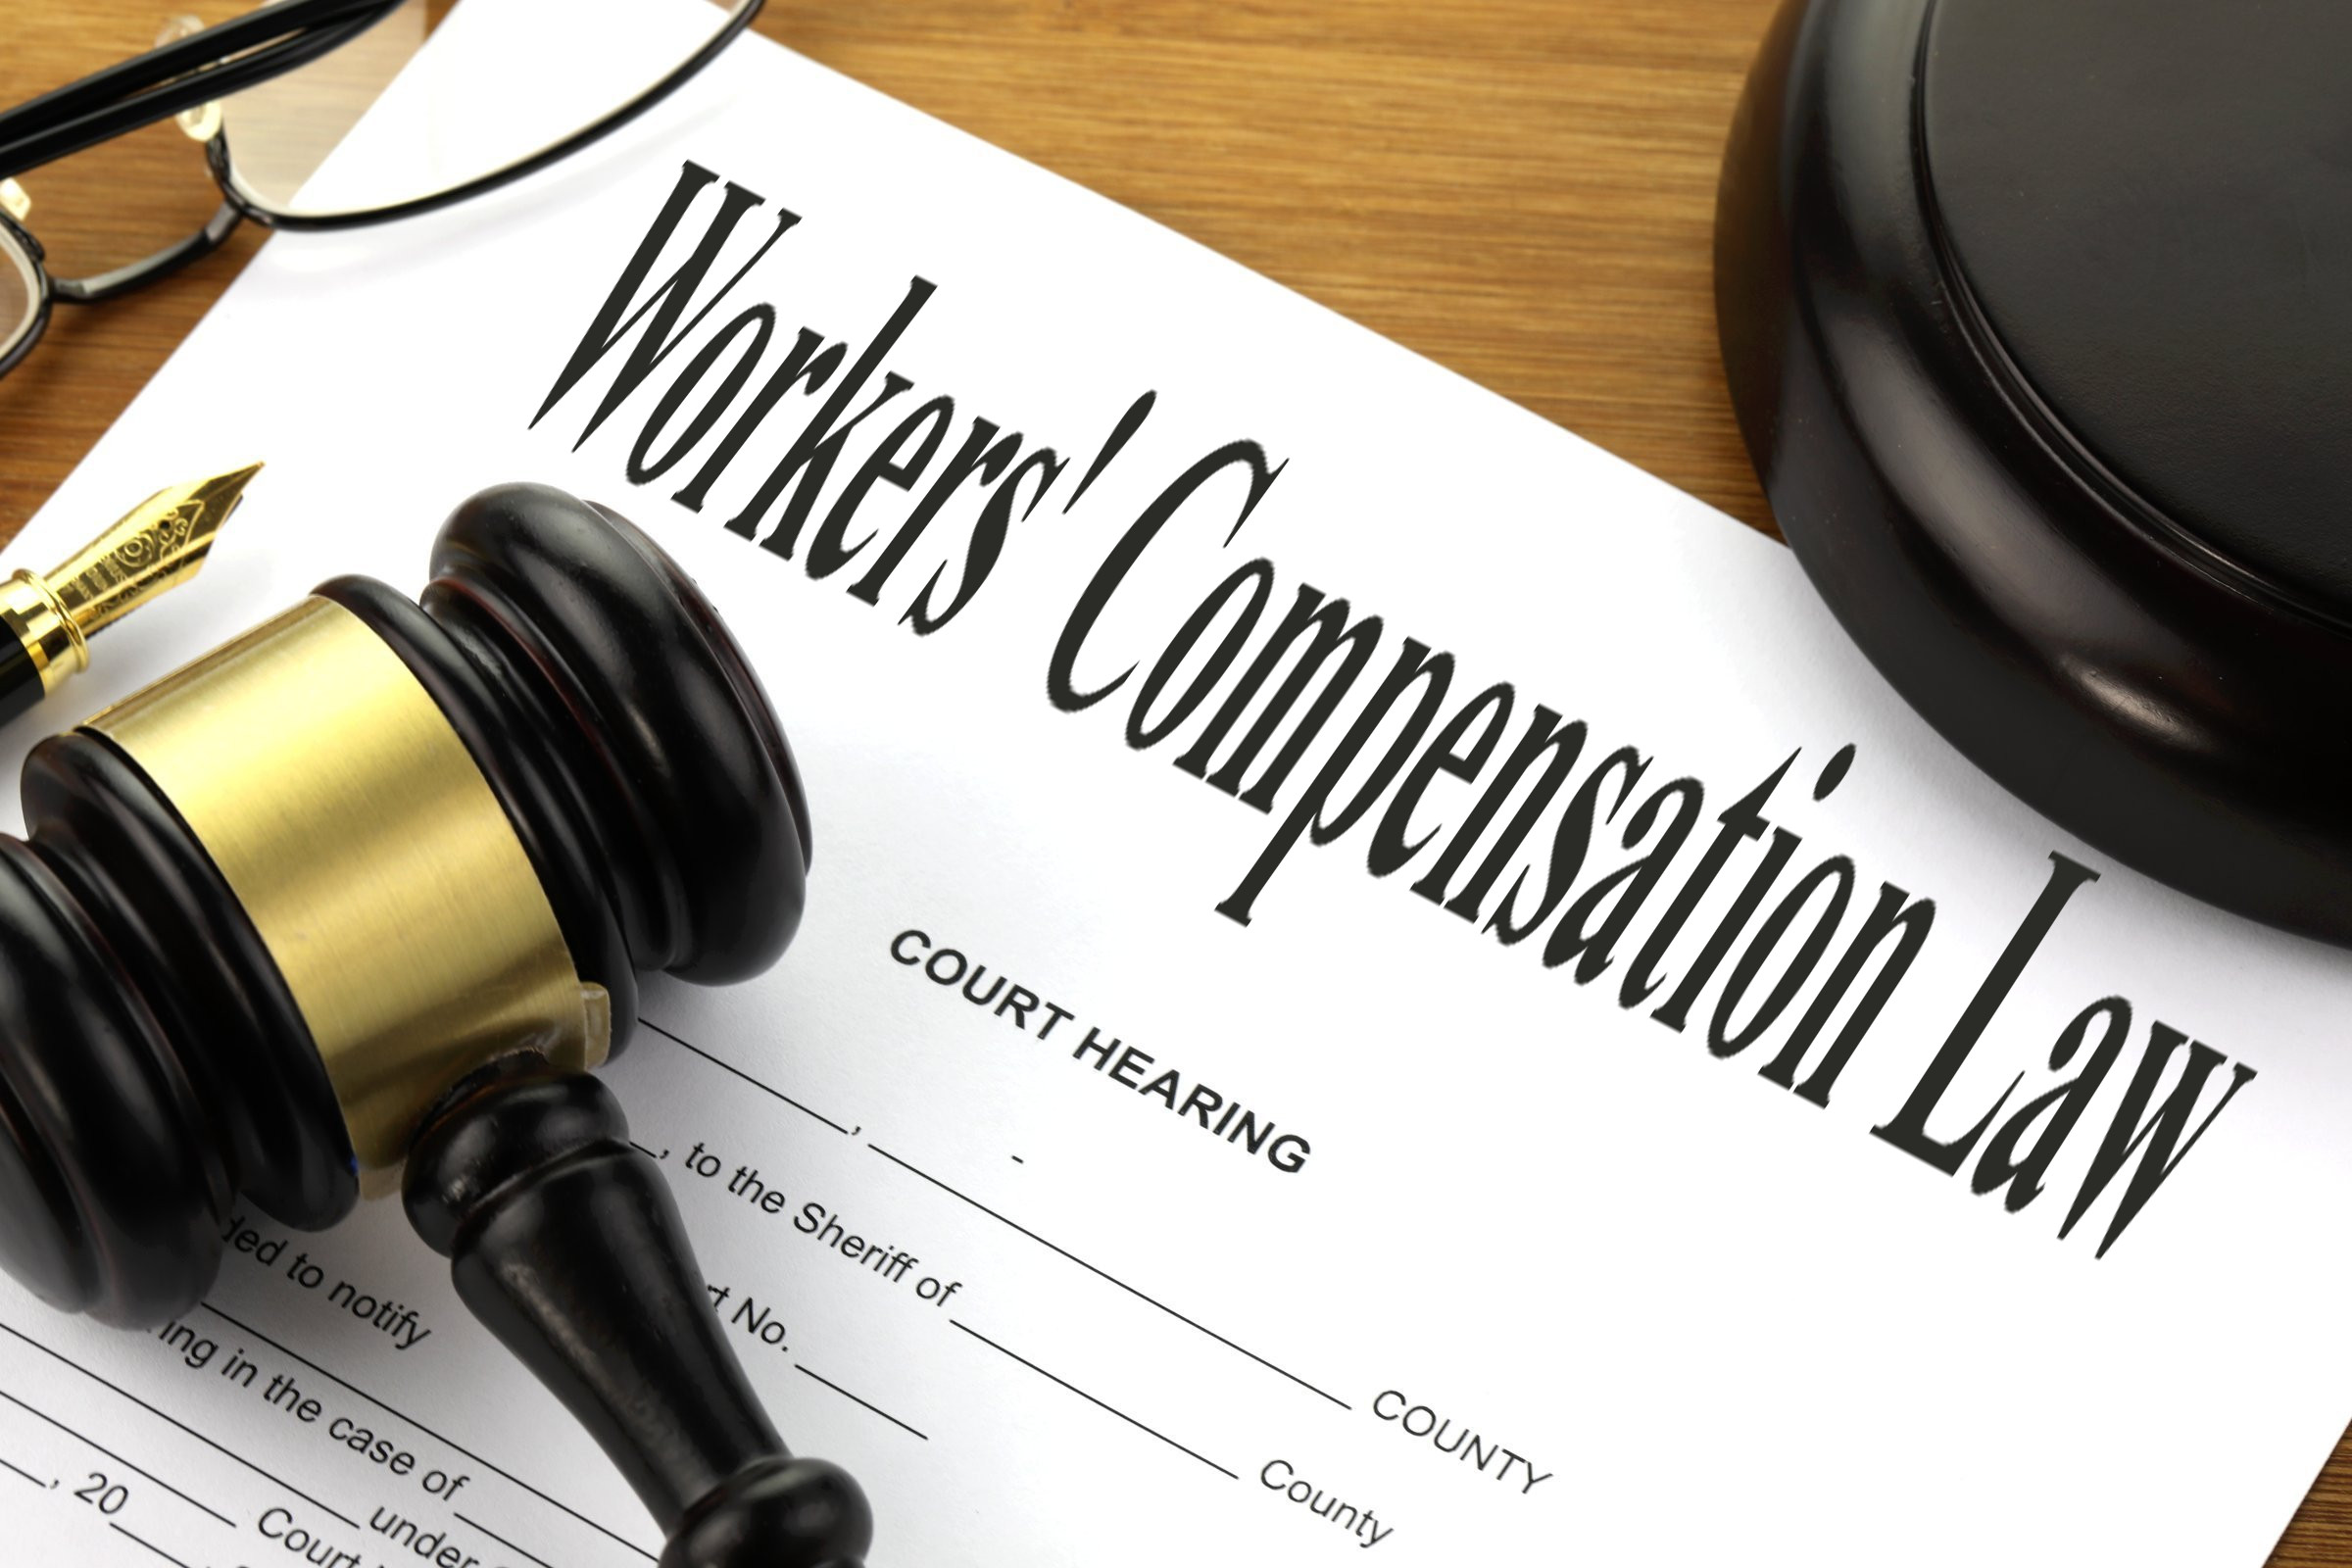 Workers Compensation Law - Free of Charge Creative Commons Legal 1 image